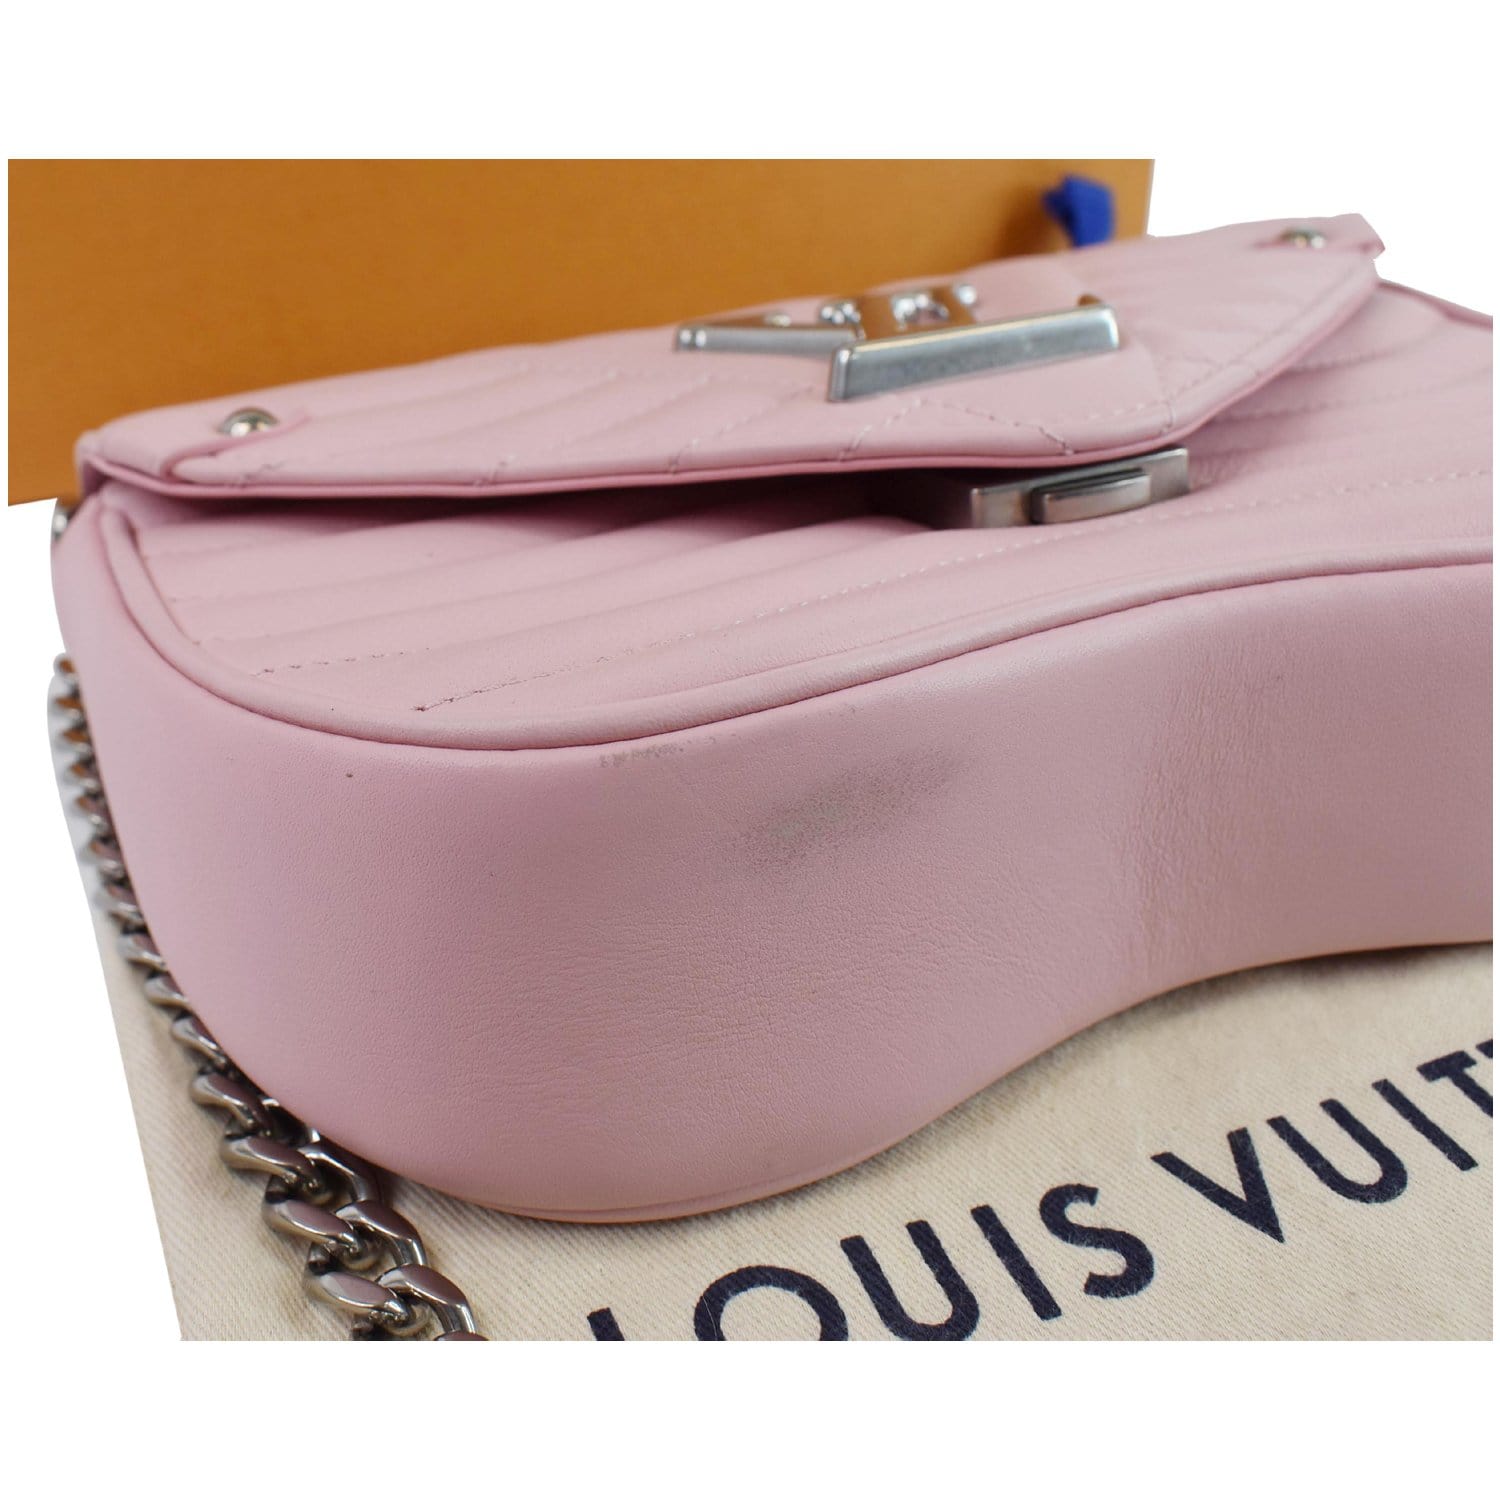 FWRD Renew Louis Vuitton New Wave PM Chain Crossbody Bag in Pink